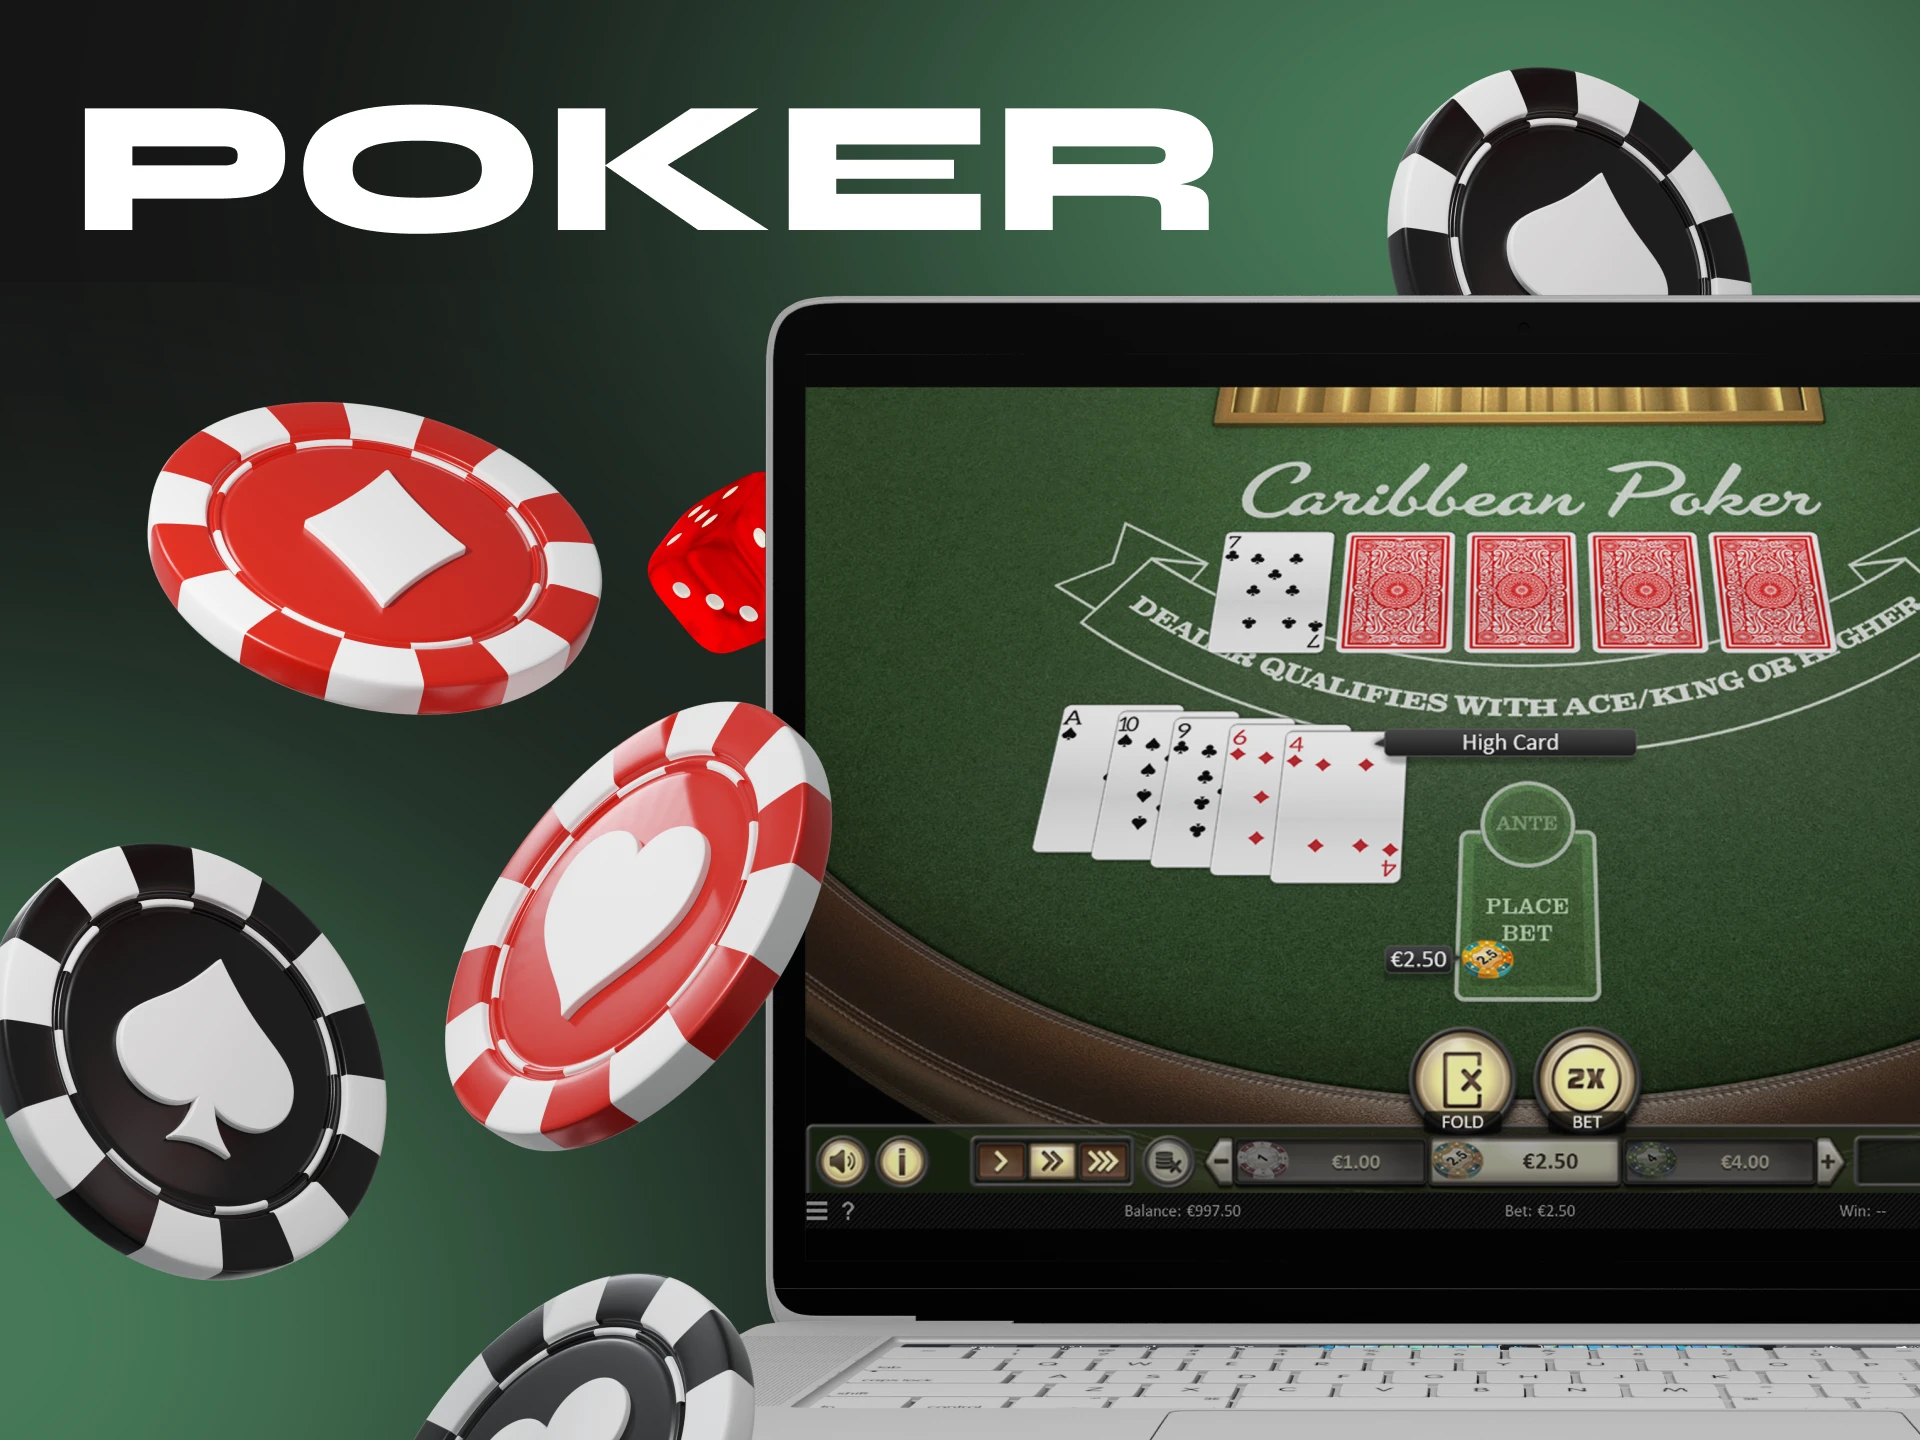 If you like poker, try playing this game at a crypto casino.